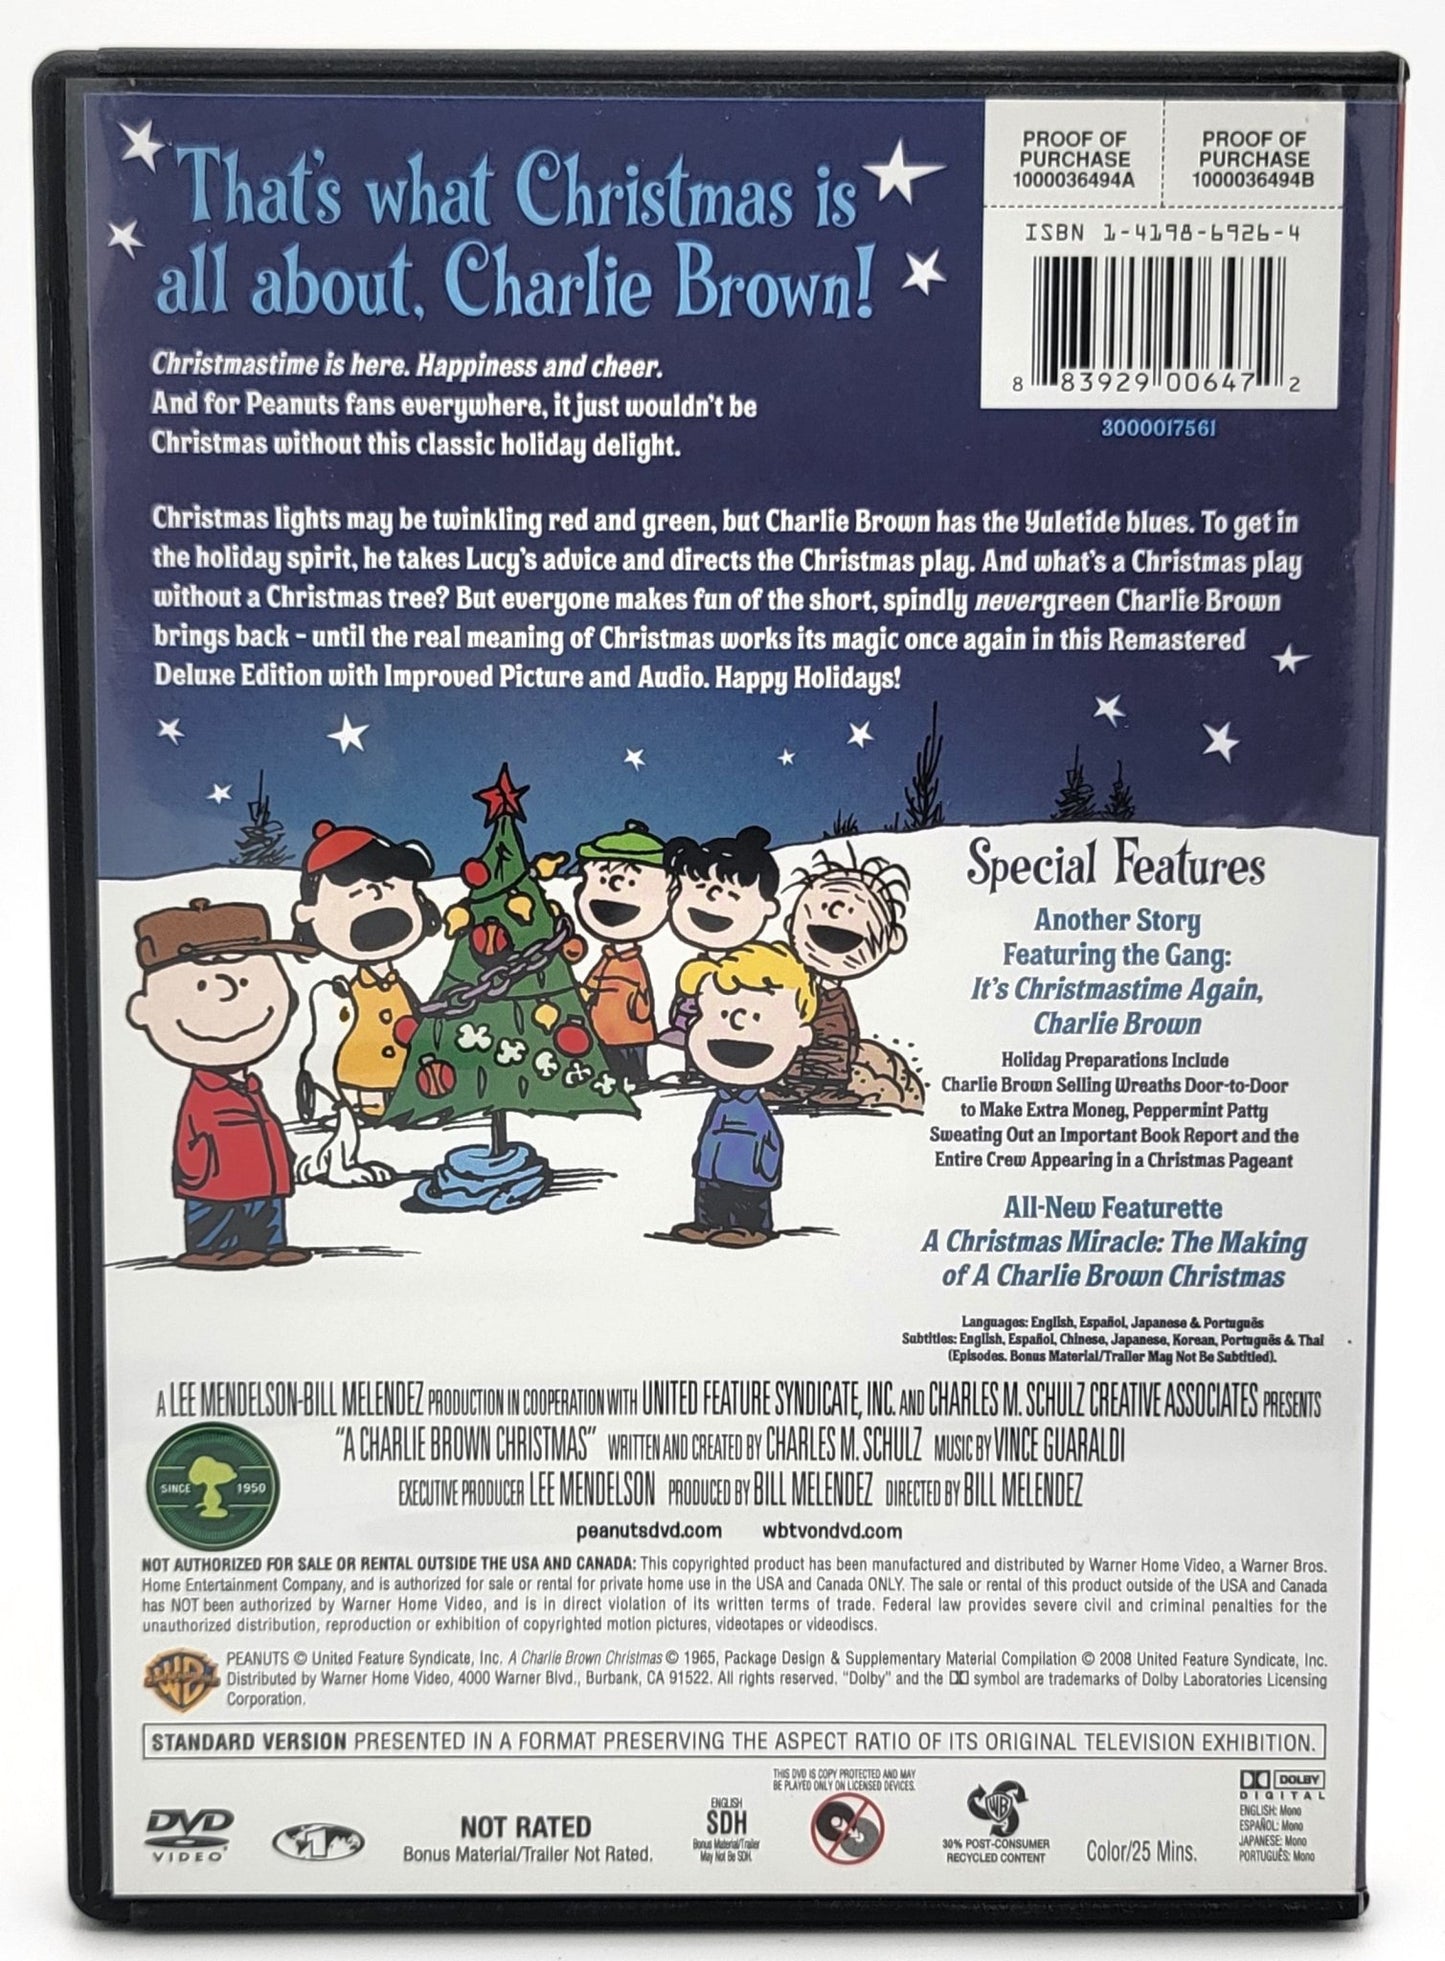 Warner Brothers - A Charlie Brown Christmas | DVD | Remastered Deluxe Edition - DVD - Steady Bunny Shop